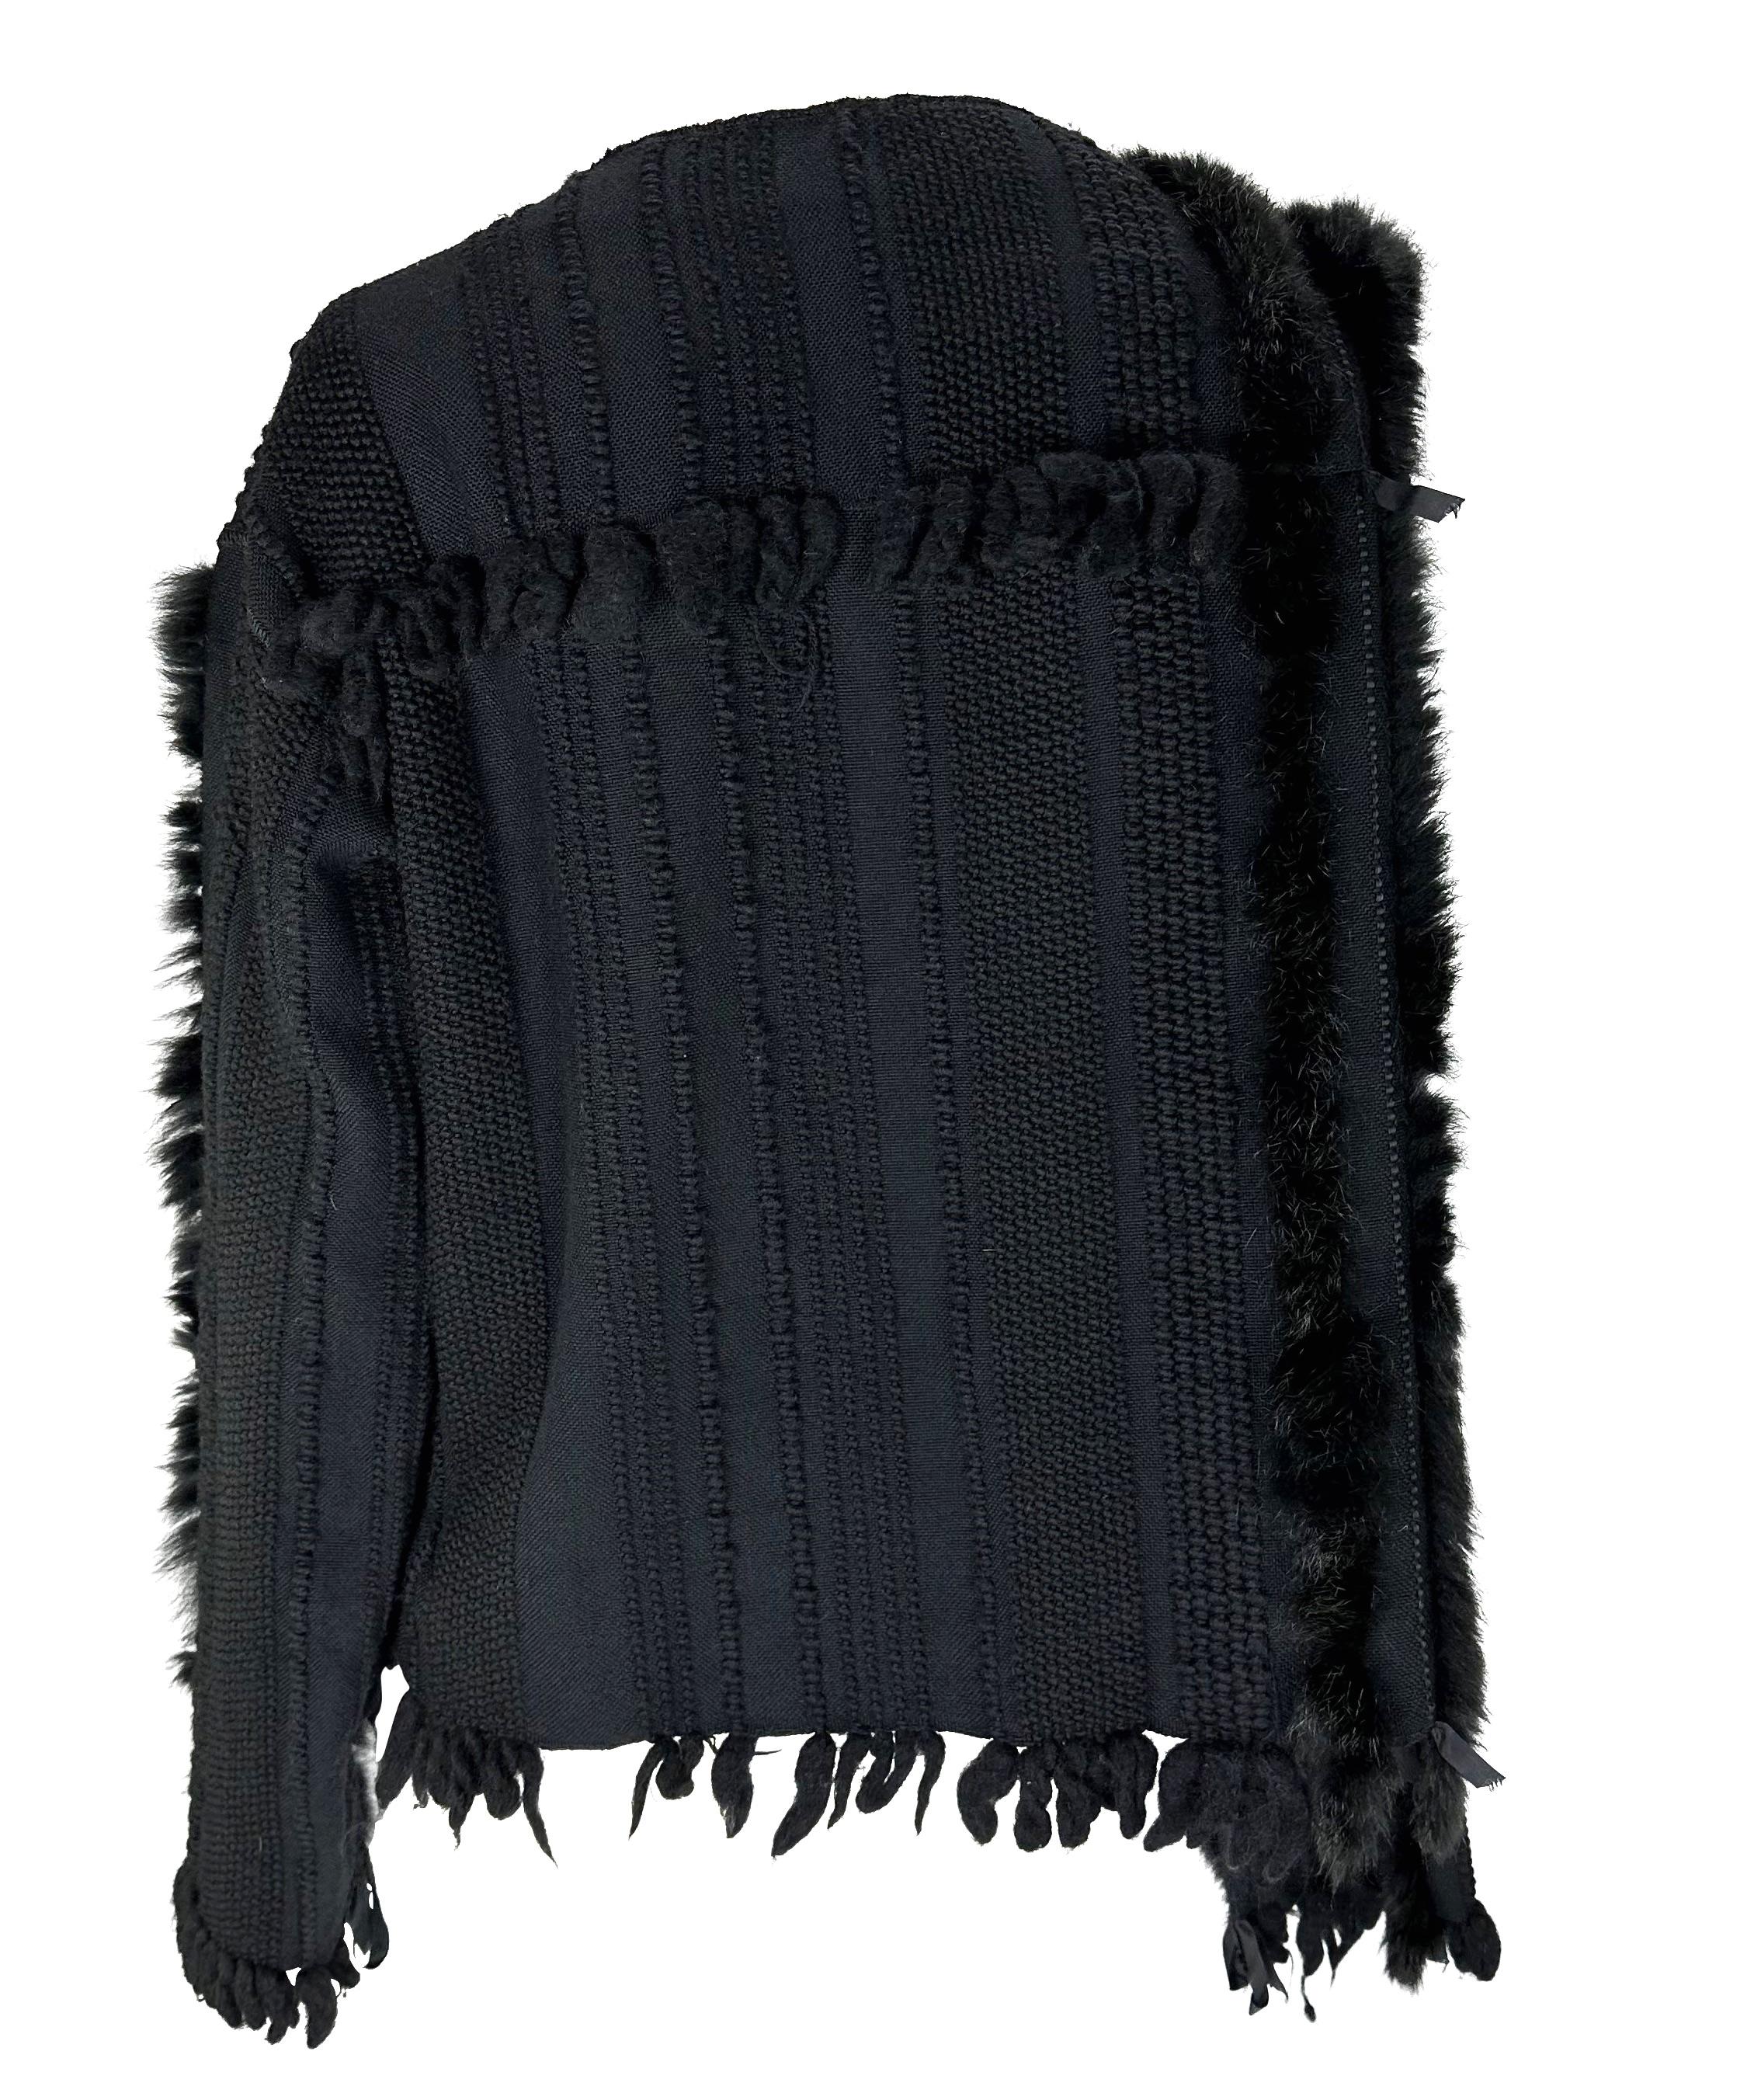 F/W 2002 Gucci by Tom Ford Black Fur Trimmed Knit Lace-Up Oversized Sweater Top For Sale 3